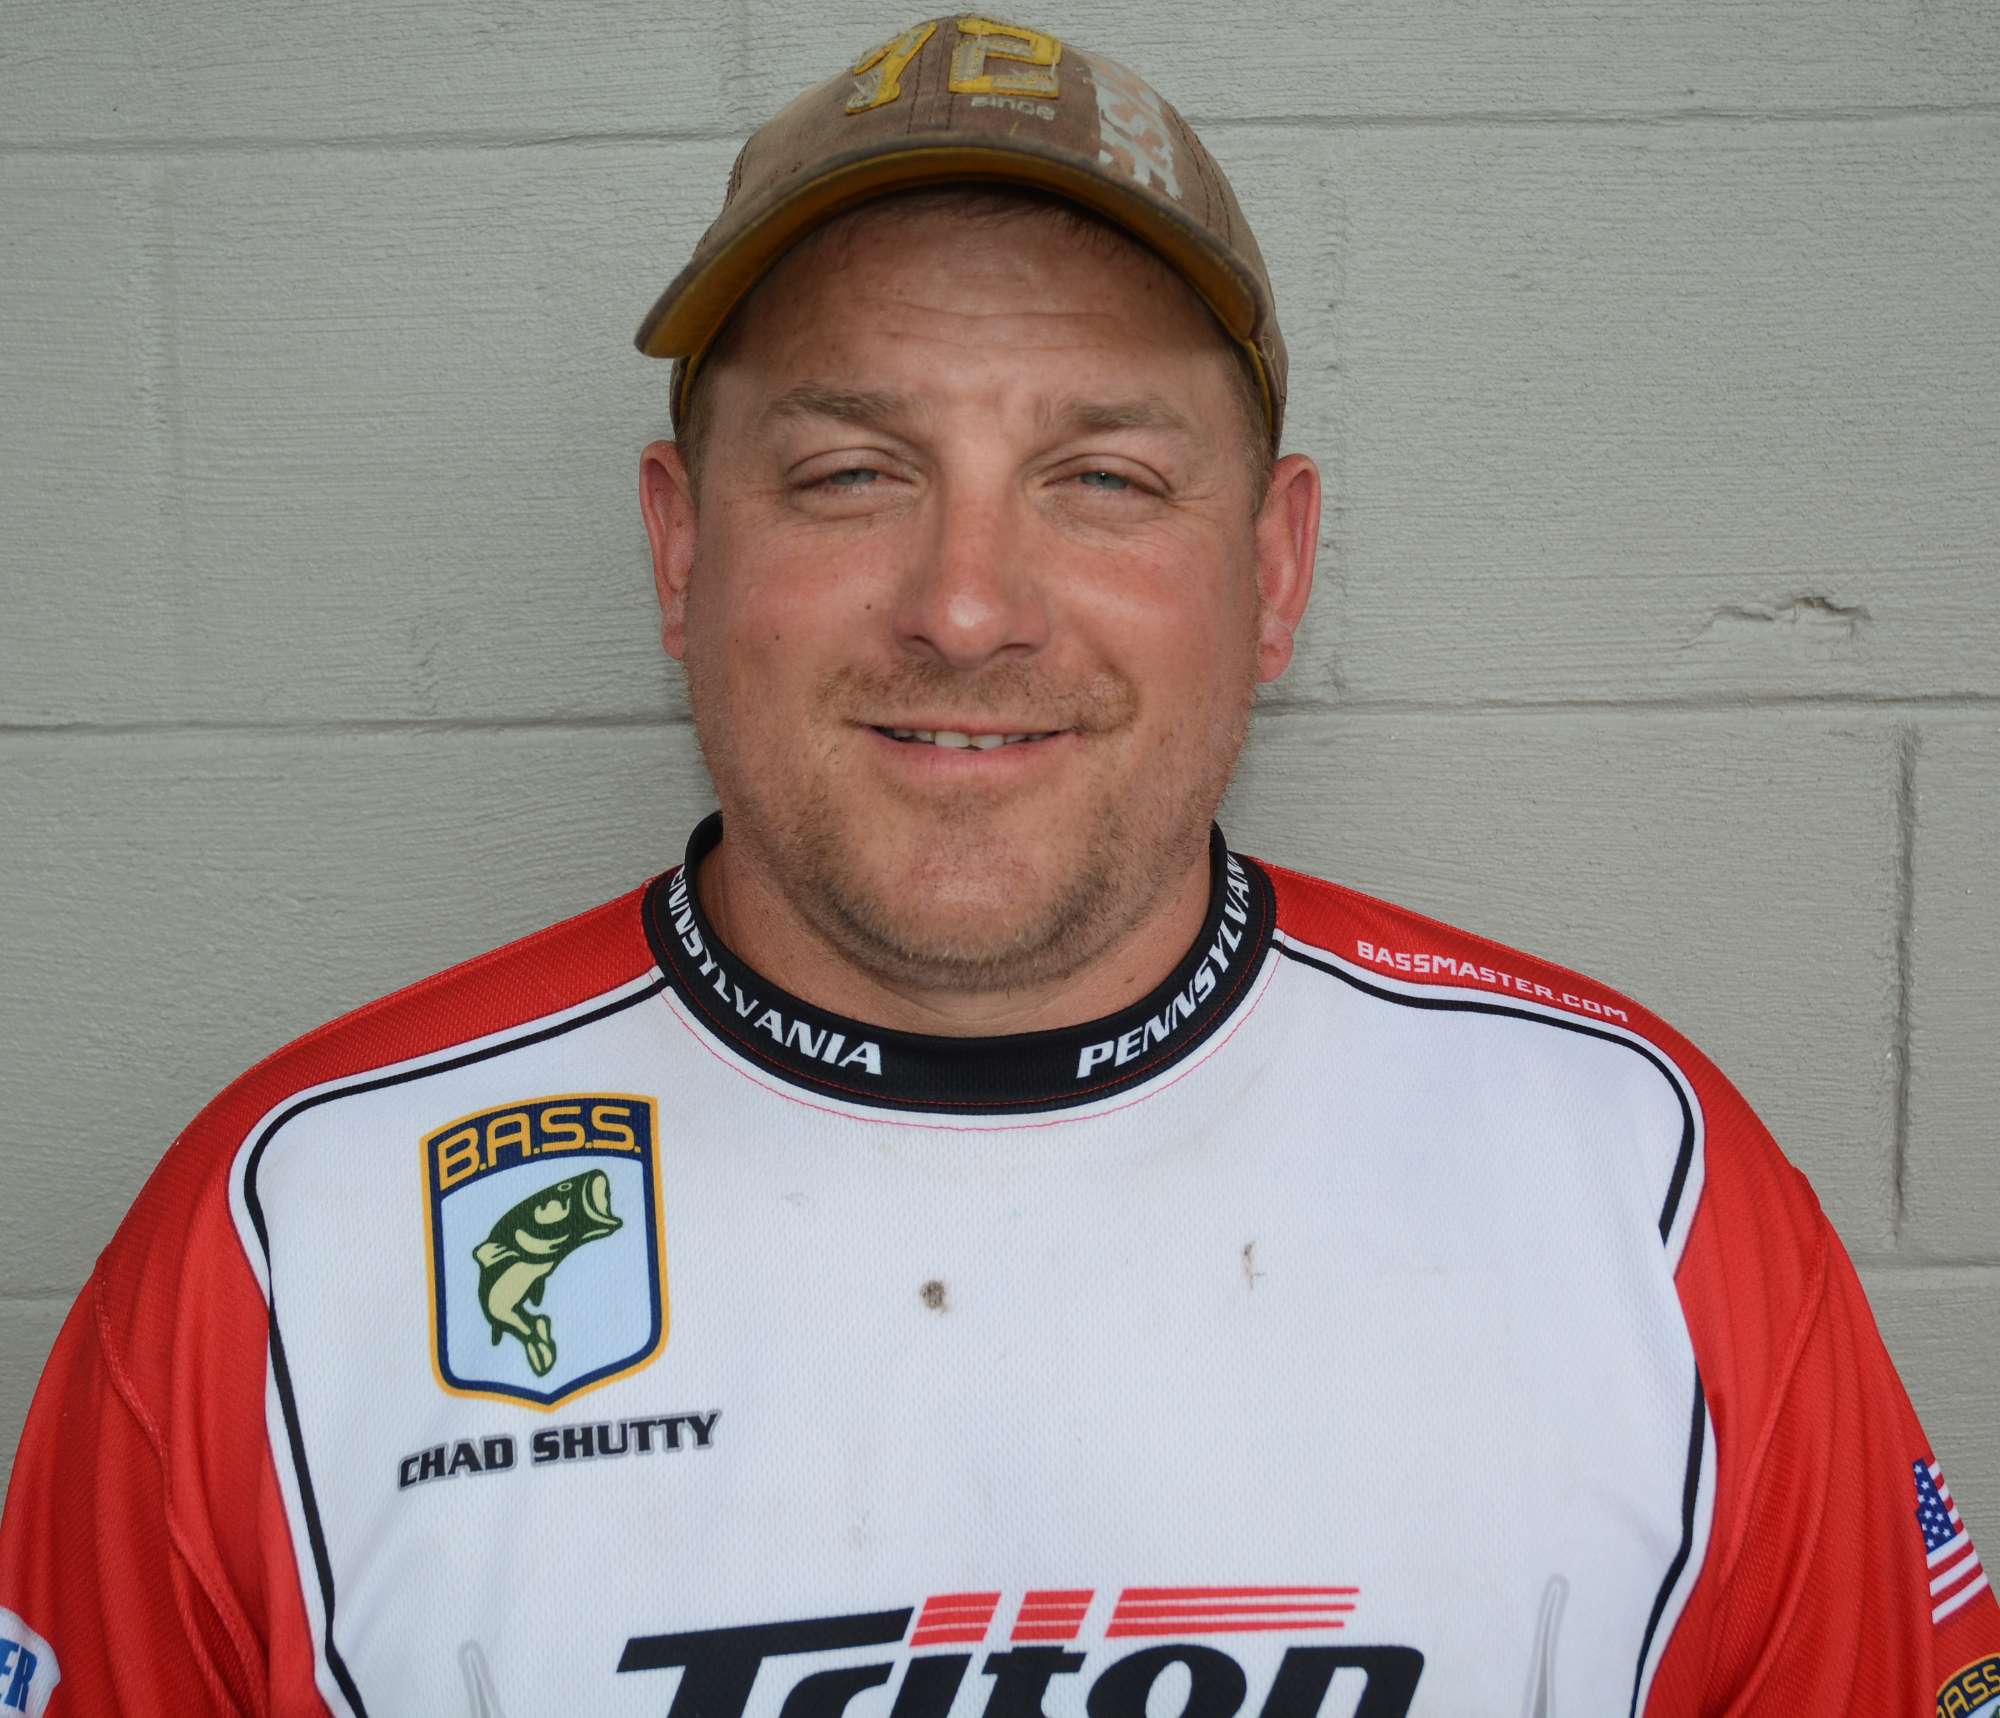 Chad Shutty of Pennsylvania is a member of the Patton Bassmasters. This will be his first trip to the championship. He's a driver by trade, and for fun, he coaches Little League or goes hunting or trapping.